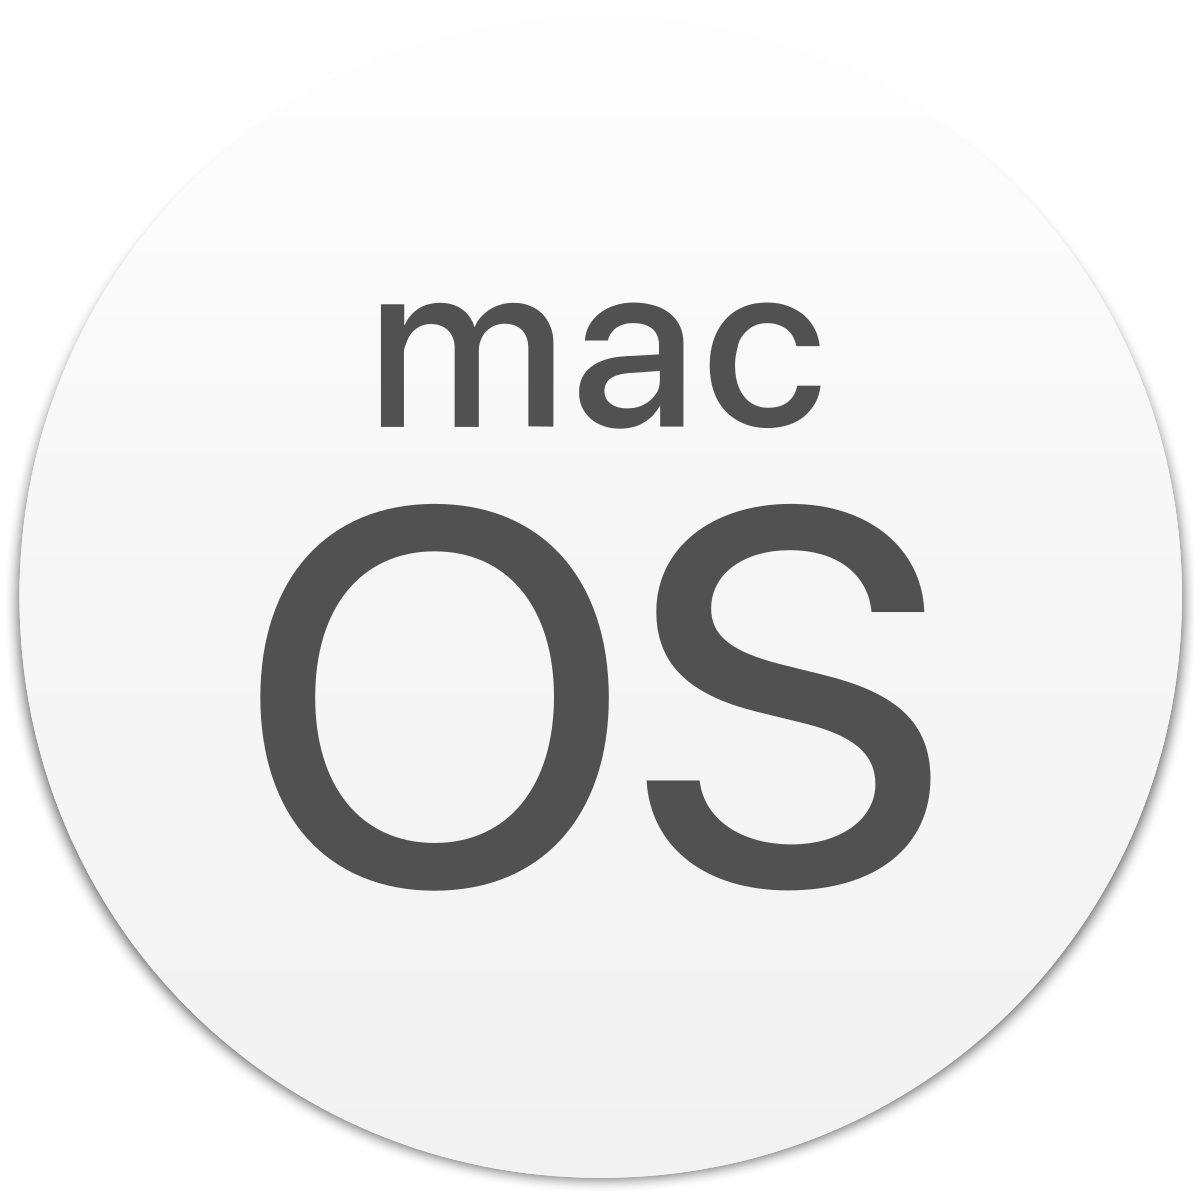 Upgrade Macos To Latest Version